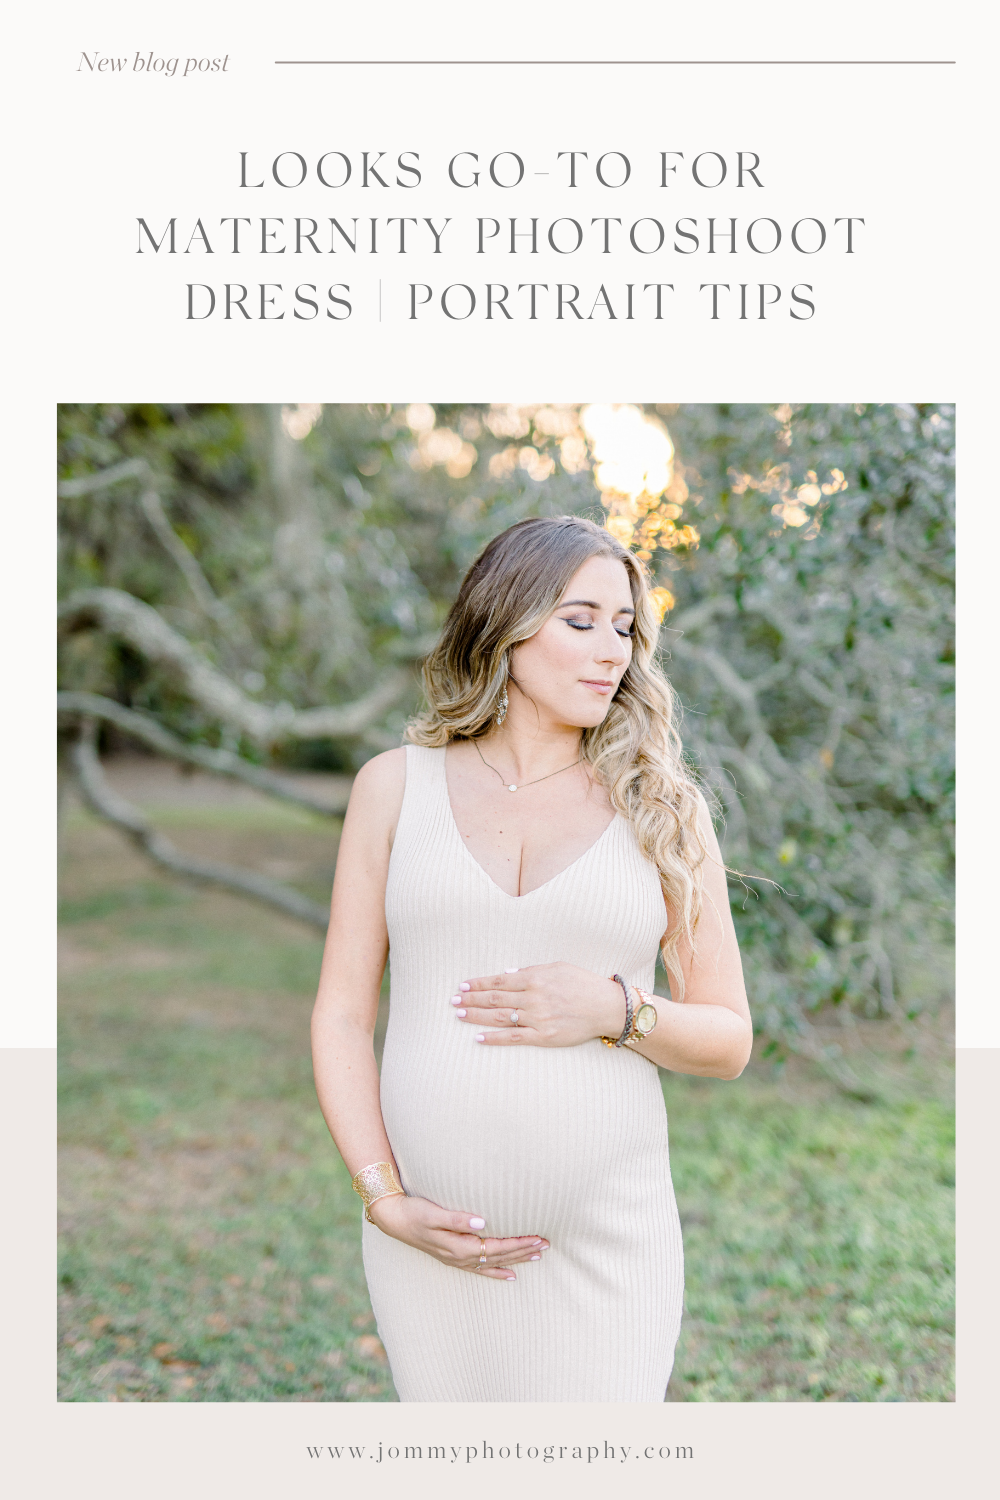 Looks go-to for Maternity Photoshoot Dress